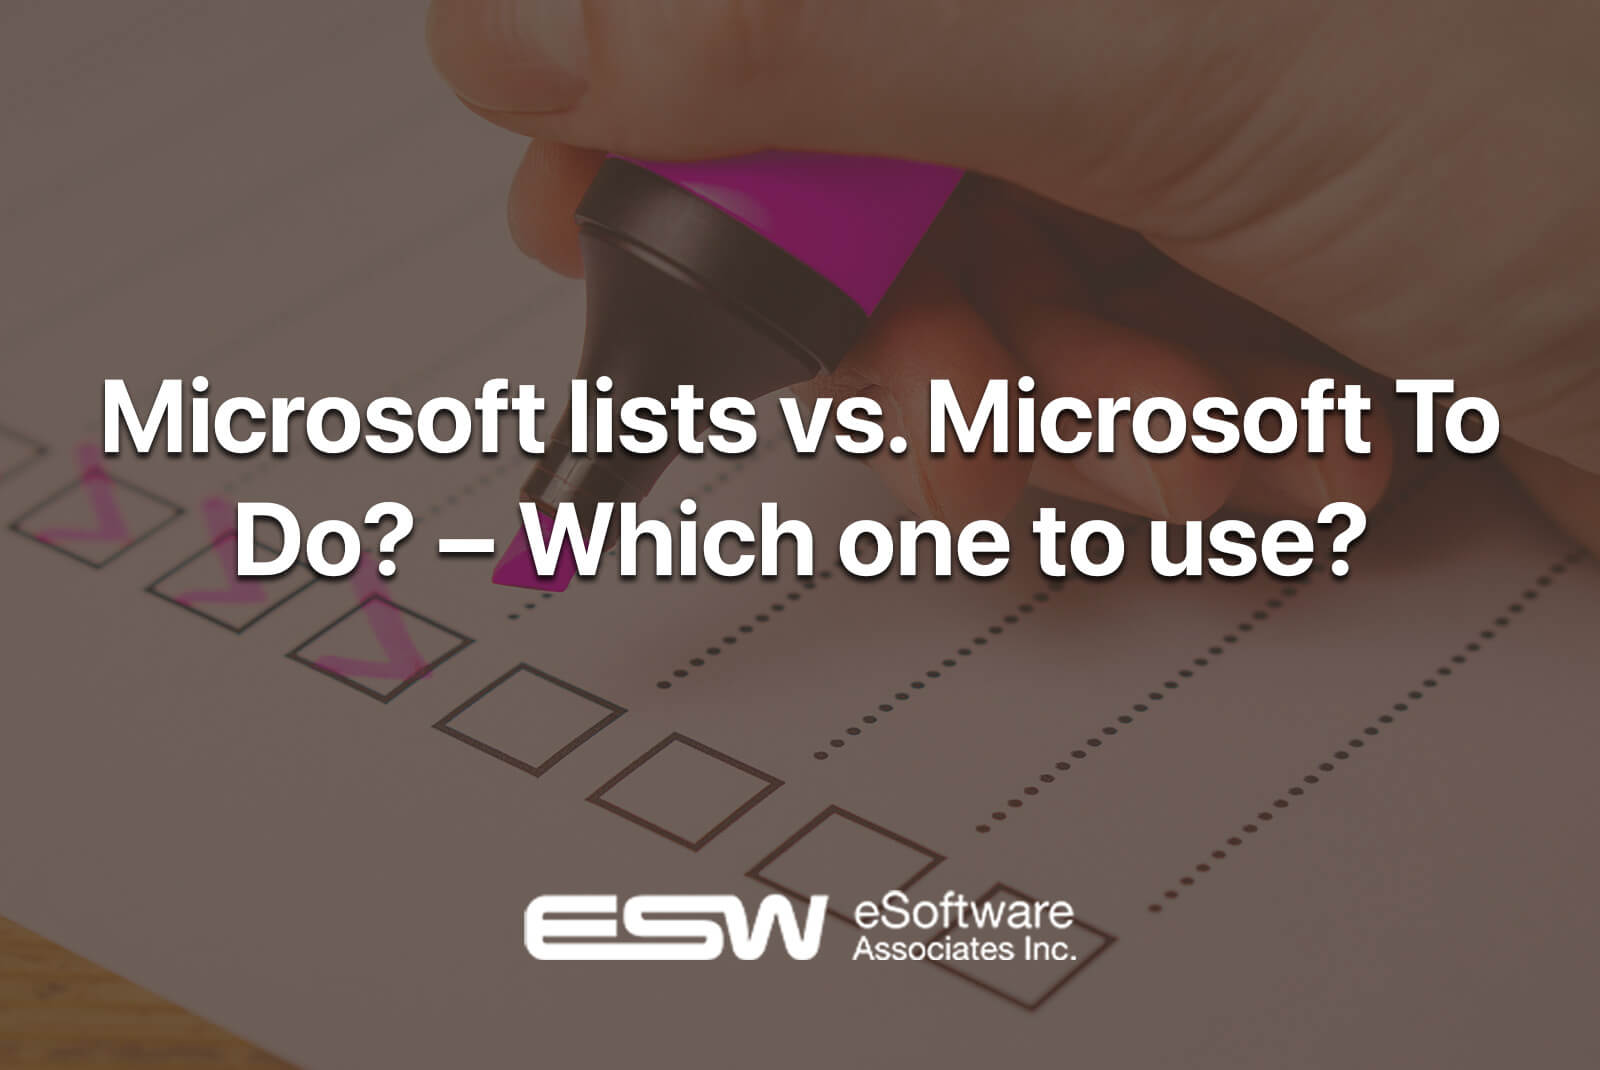 Microsoft lists vs. Microsoft To Do? – Which one to use?